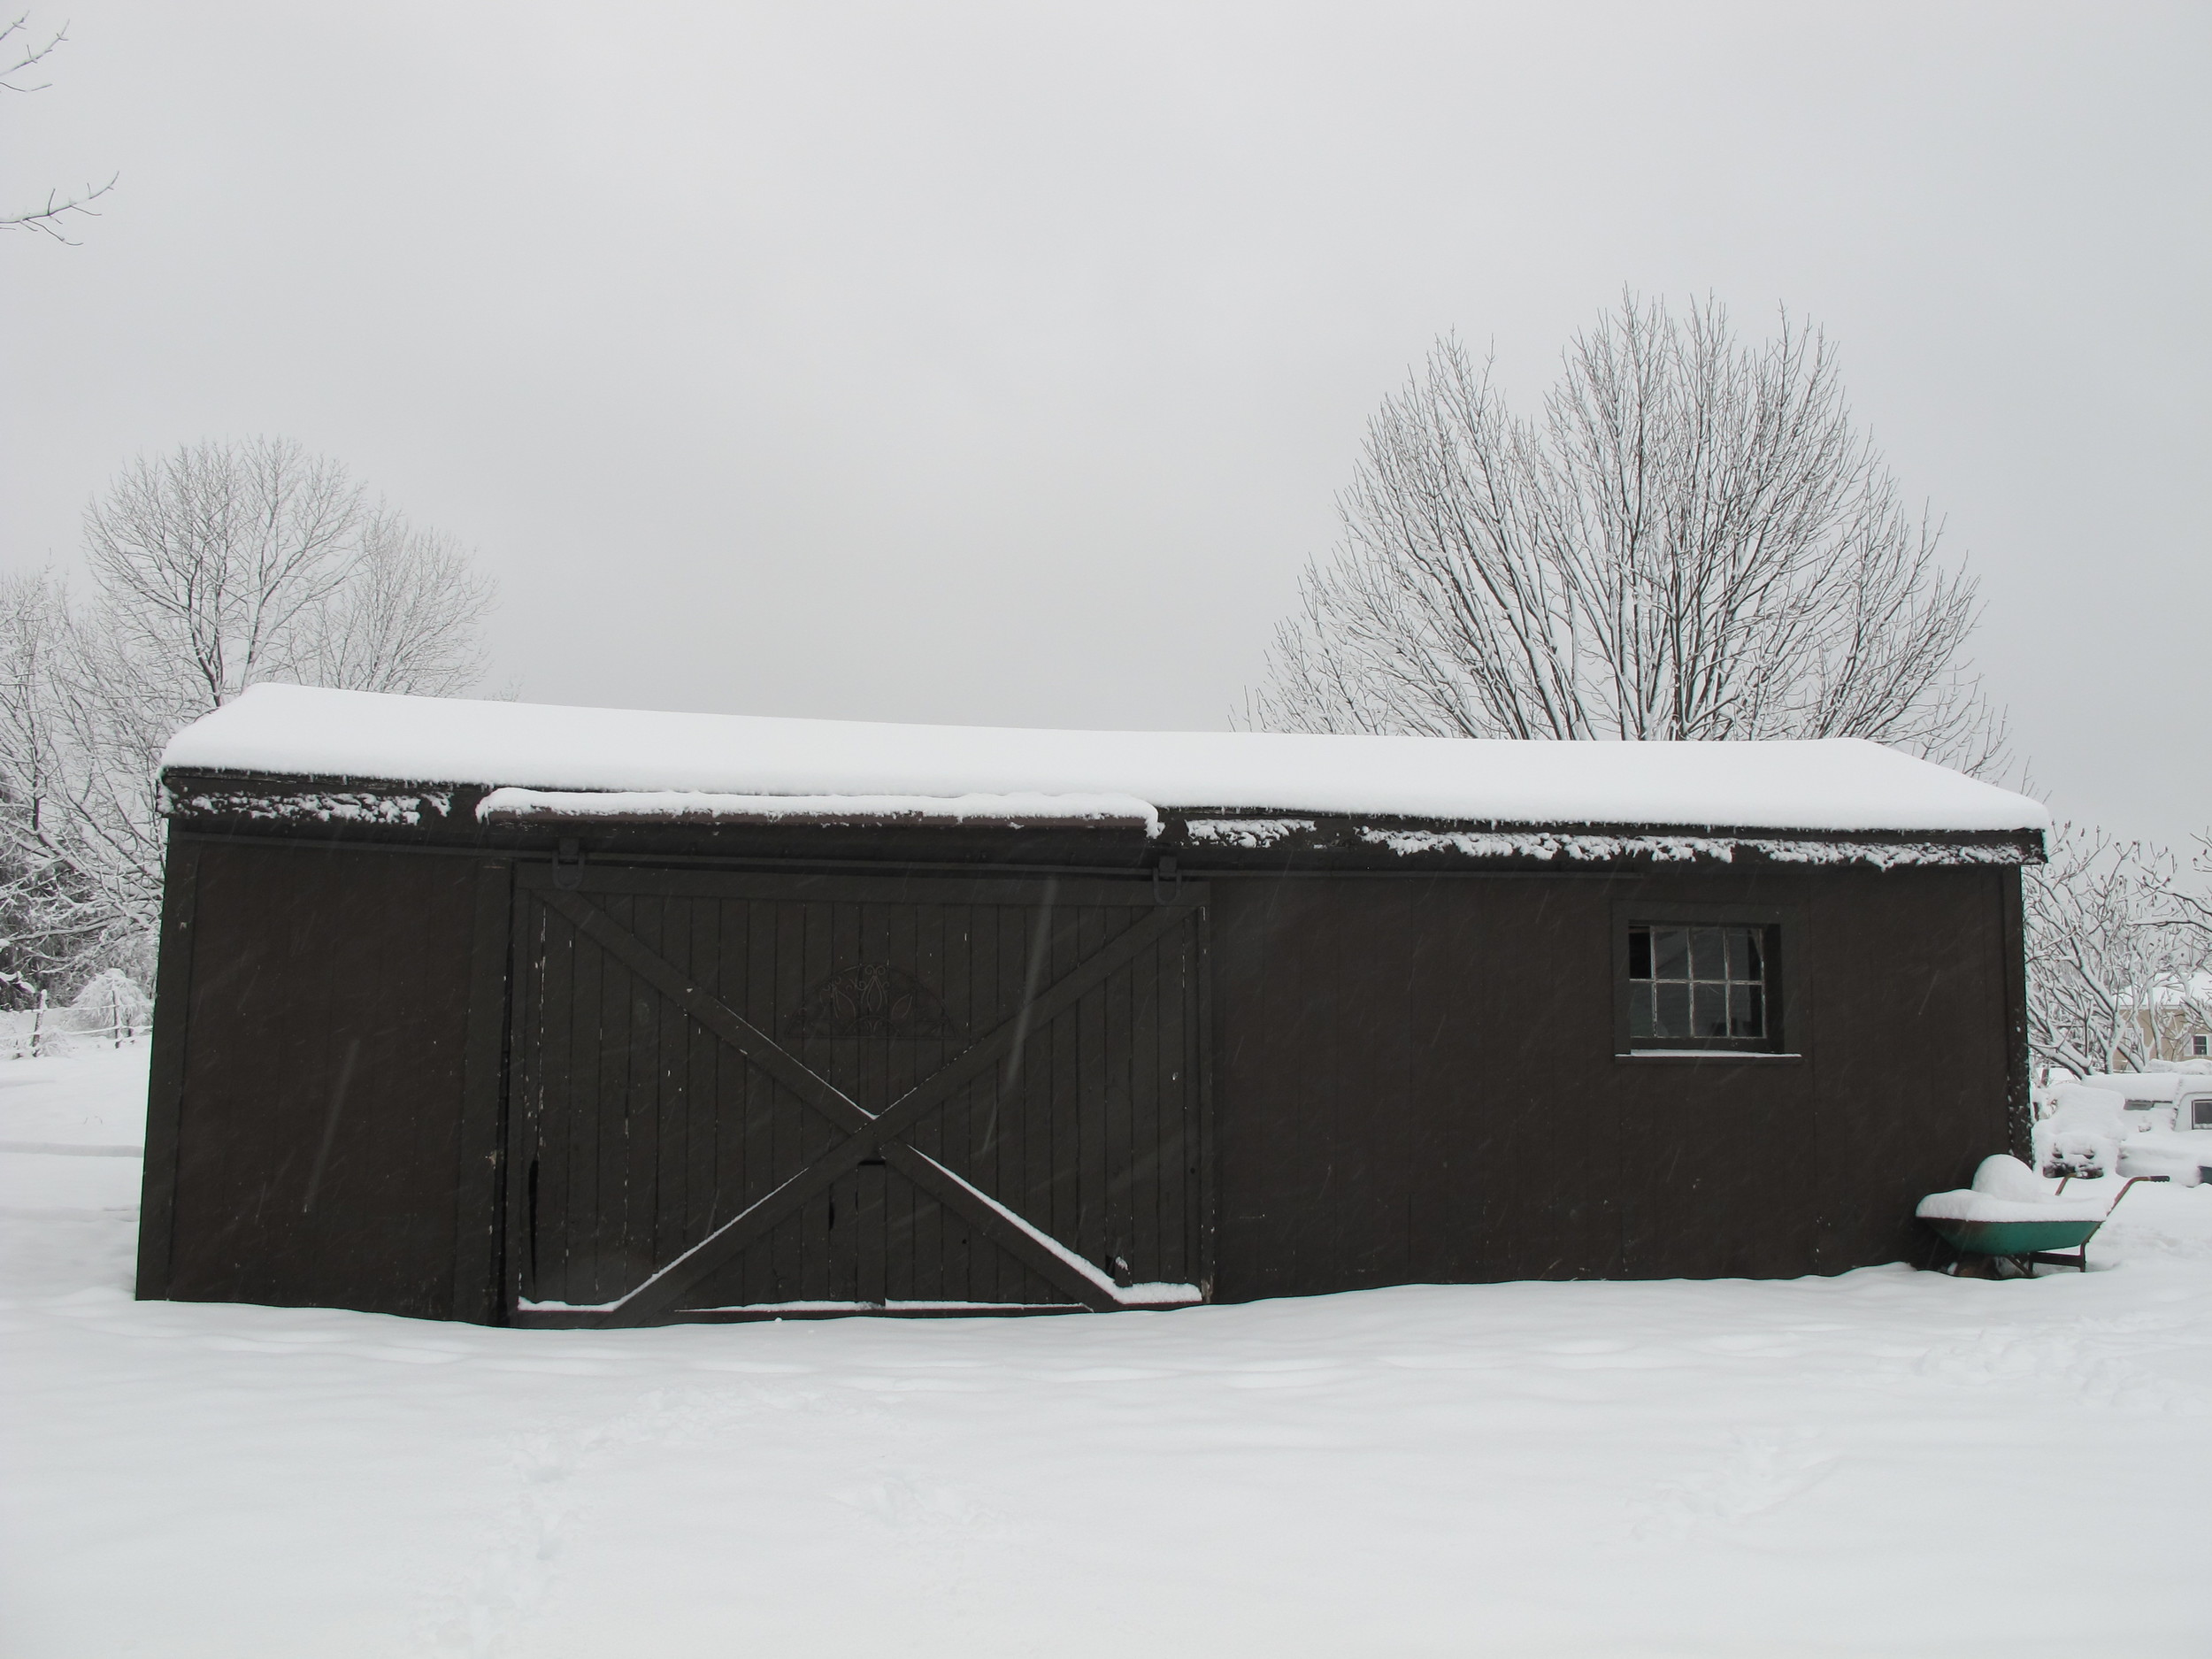  2011 photo: Over the years our barn has been home to cats, chickens, bunnies, a goat, a pony, and occasional field mice.&nbsp; 